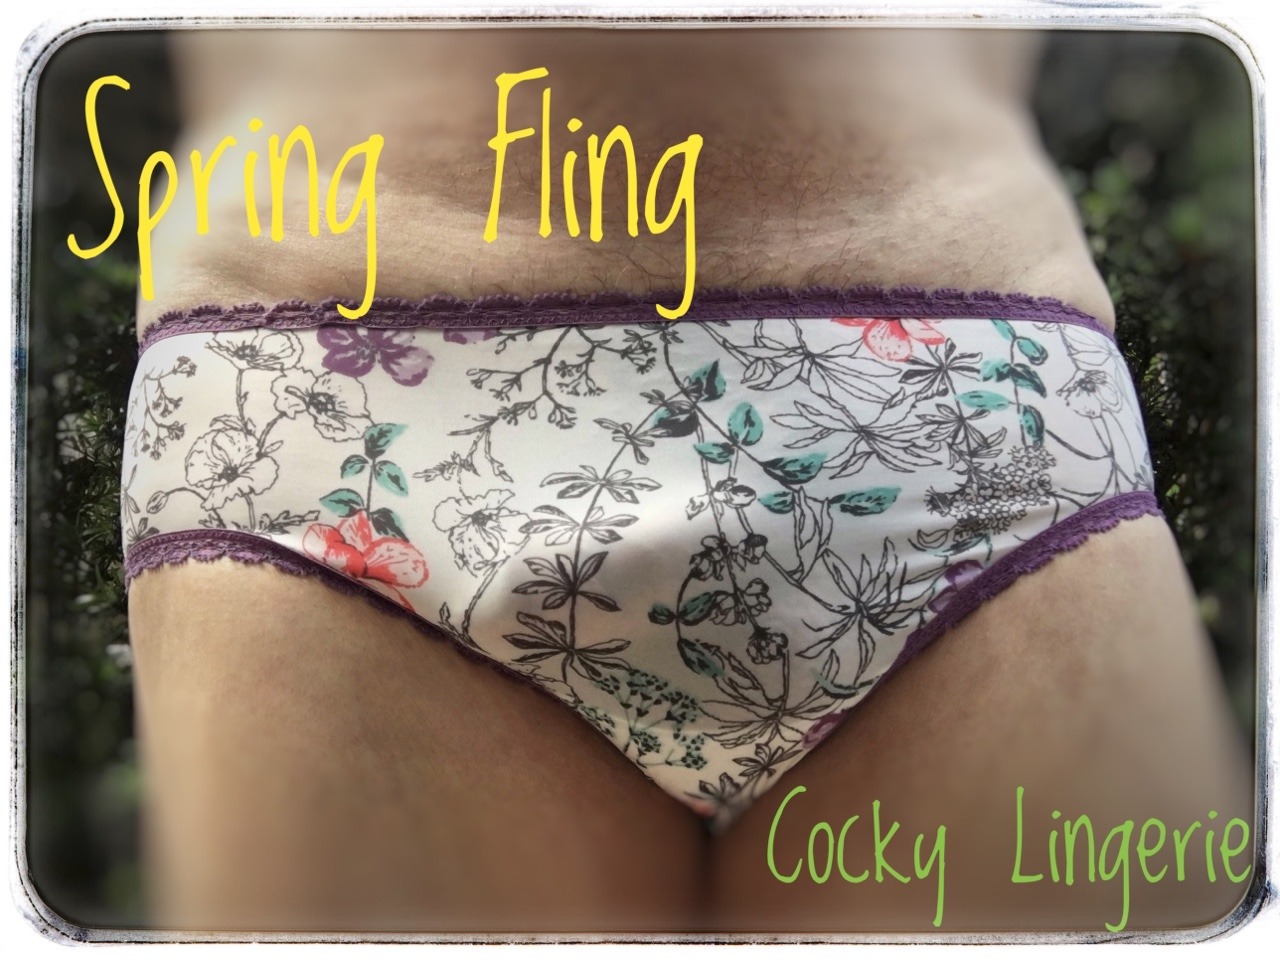 cockylingerie: It’s Spring Fling!  Time to go outside in your panties and play! 